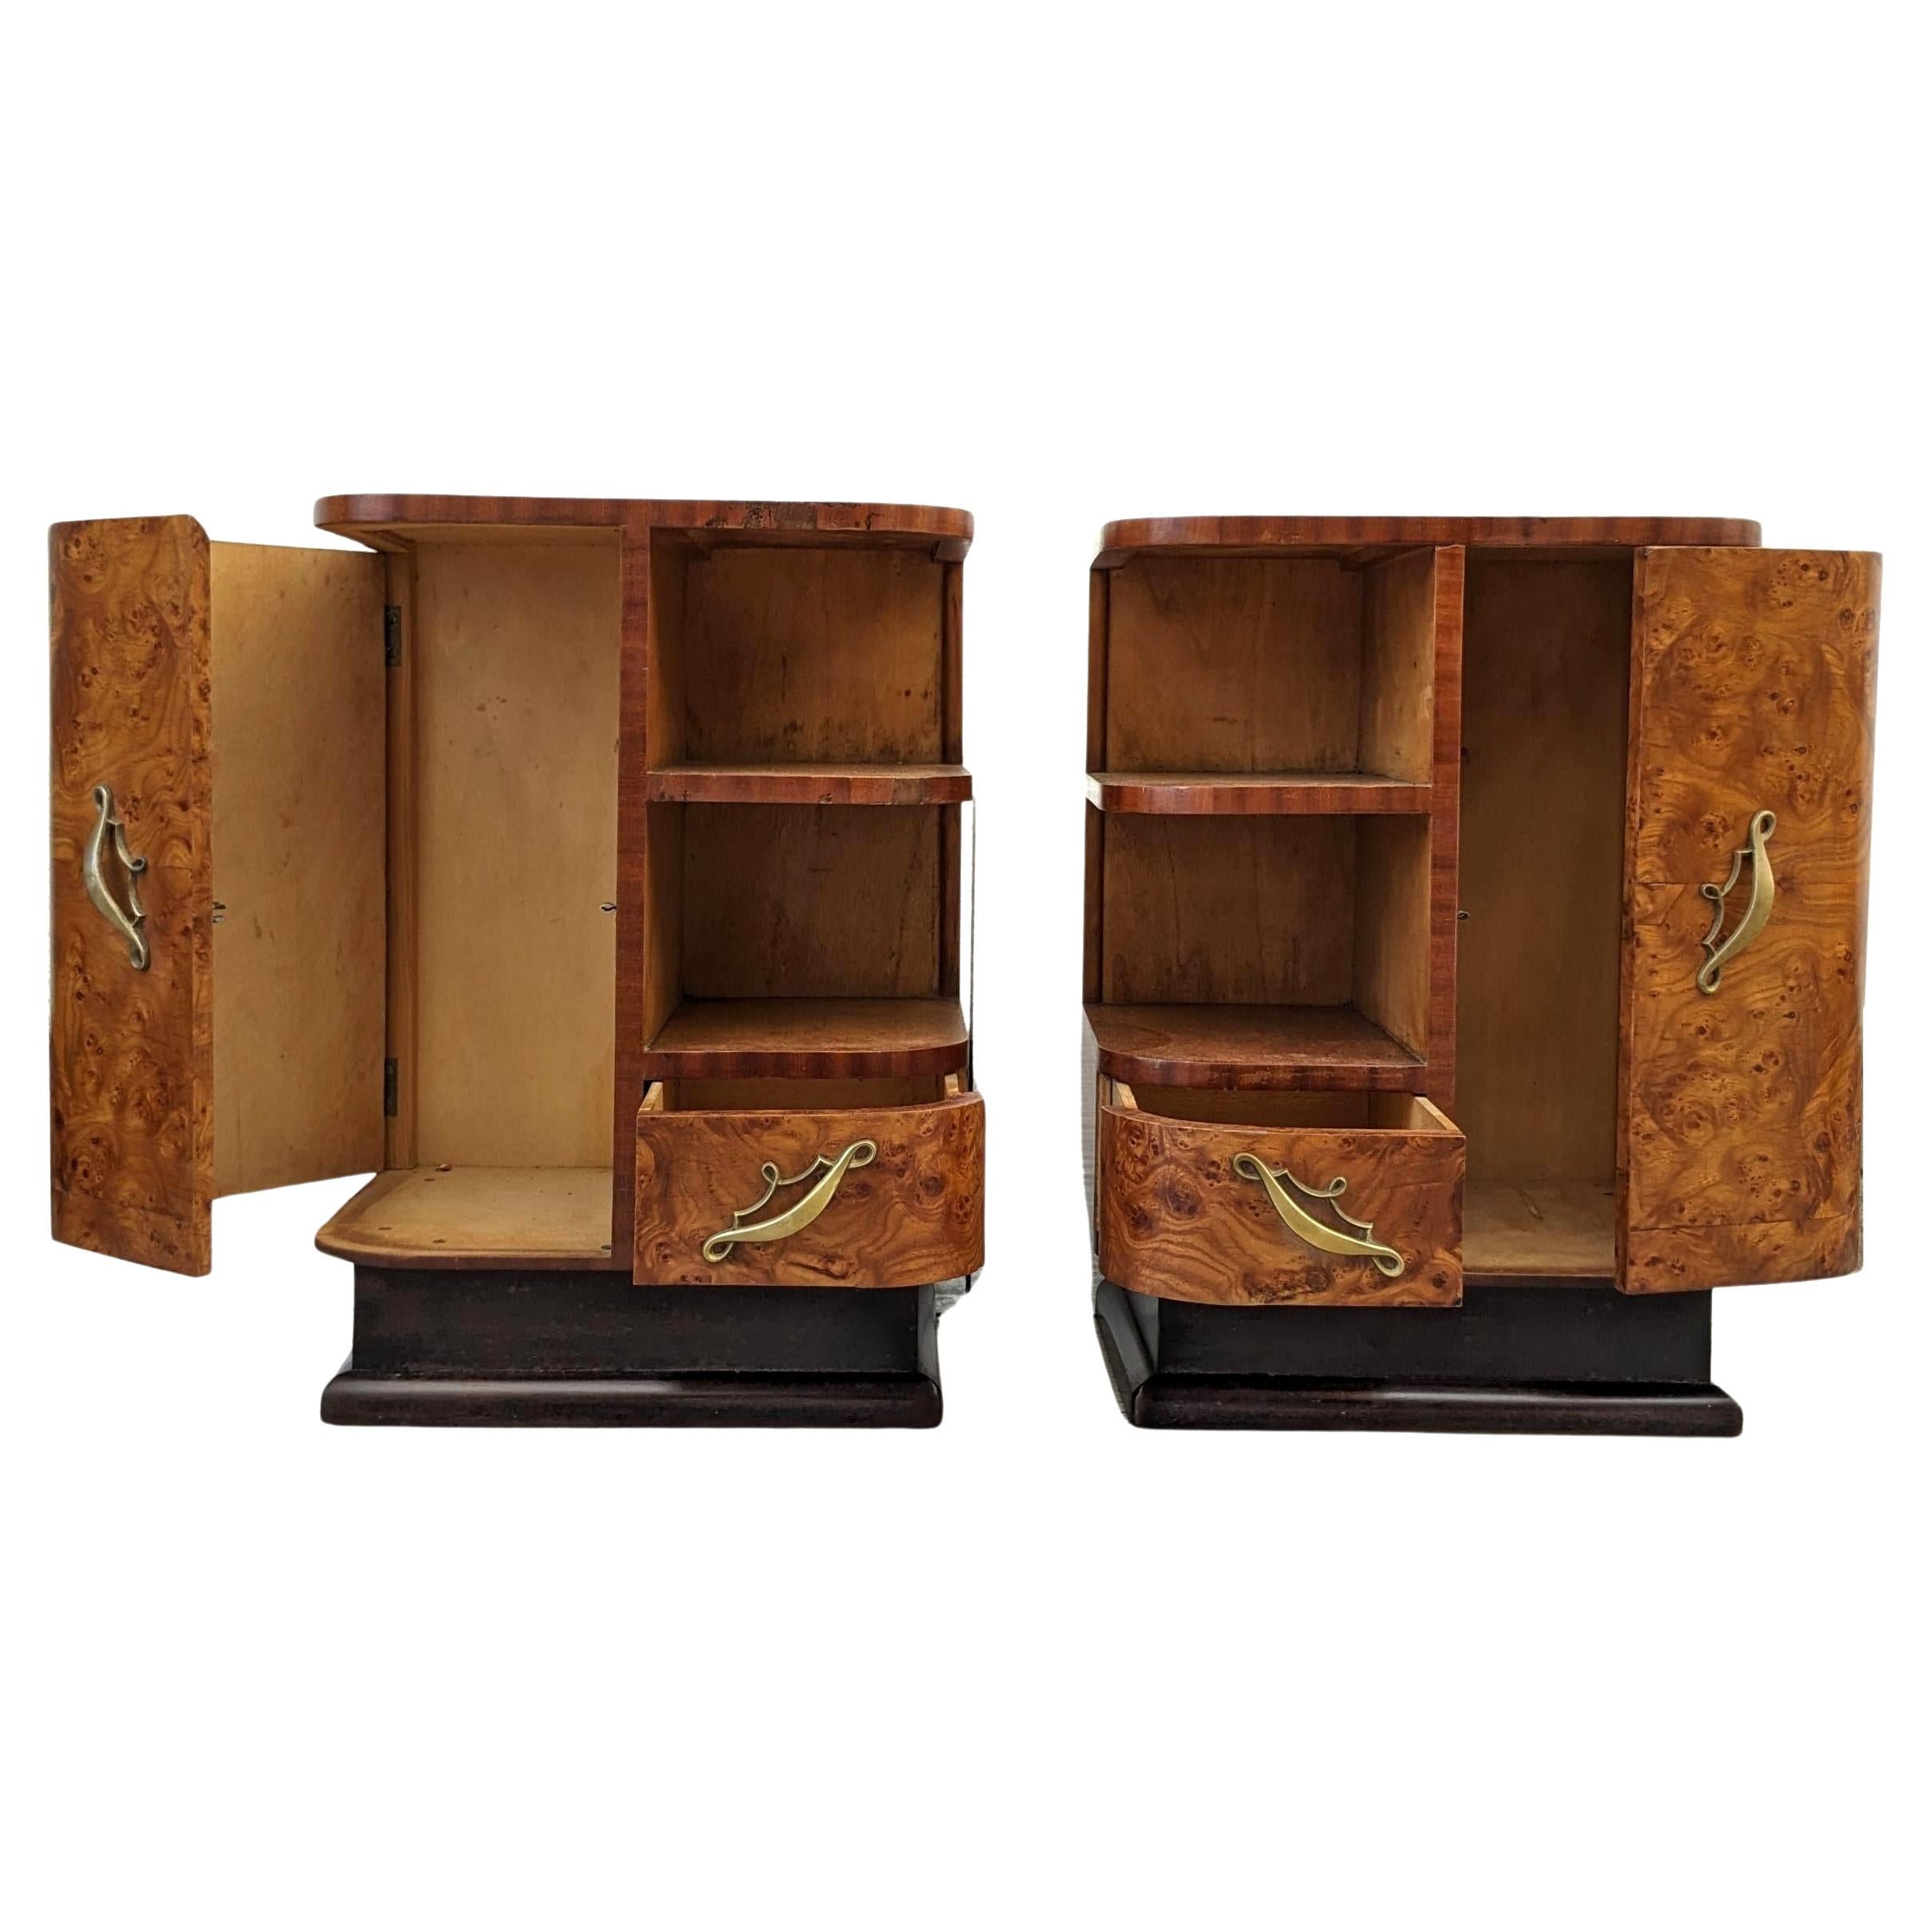 Spectacular Art Deco Pair Matching of Italian Bedside Table Nightstands, c1930 In Good Condition For Sale In Devon, England